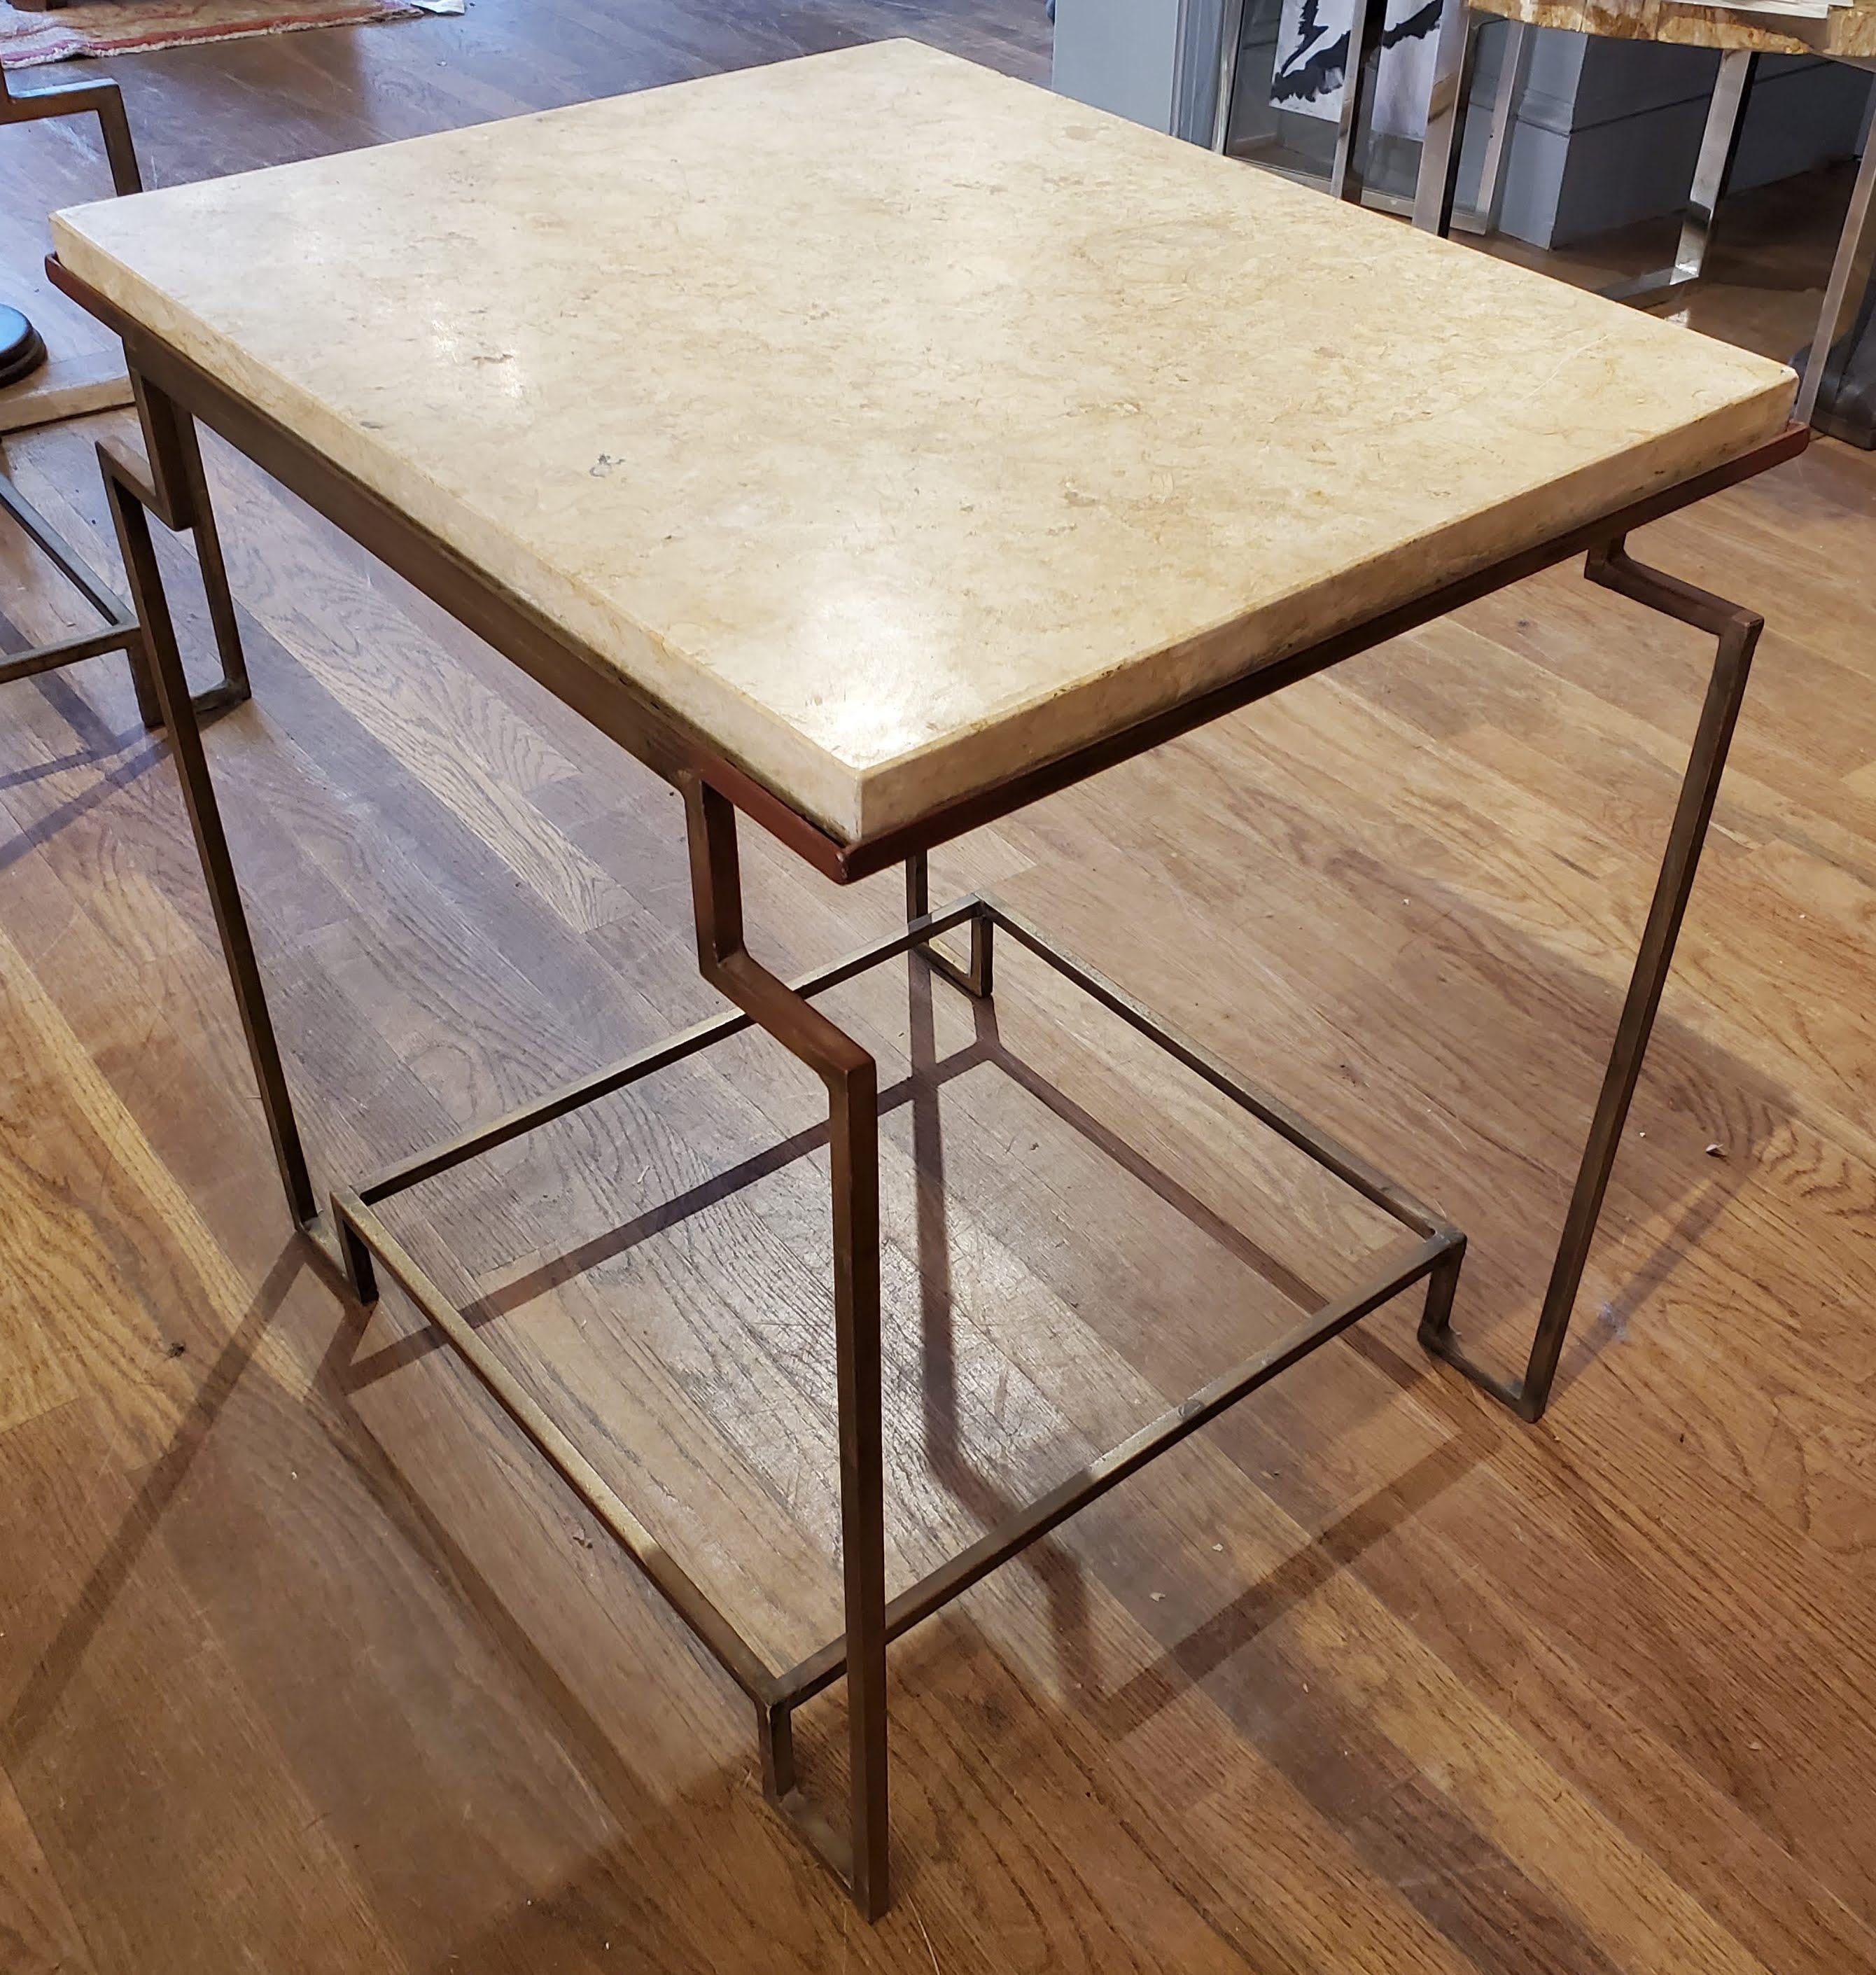 This Art Deco style gilt metal “Apollo” occasional table makes a sleek addition to any room. Custom designed and fabricated by Hastening Designs with excellent proportions. This is a very architectural side table with a “distressed” gilt finish to